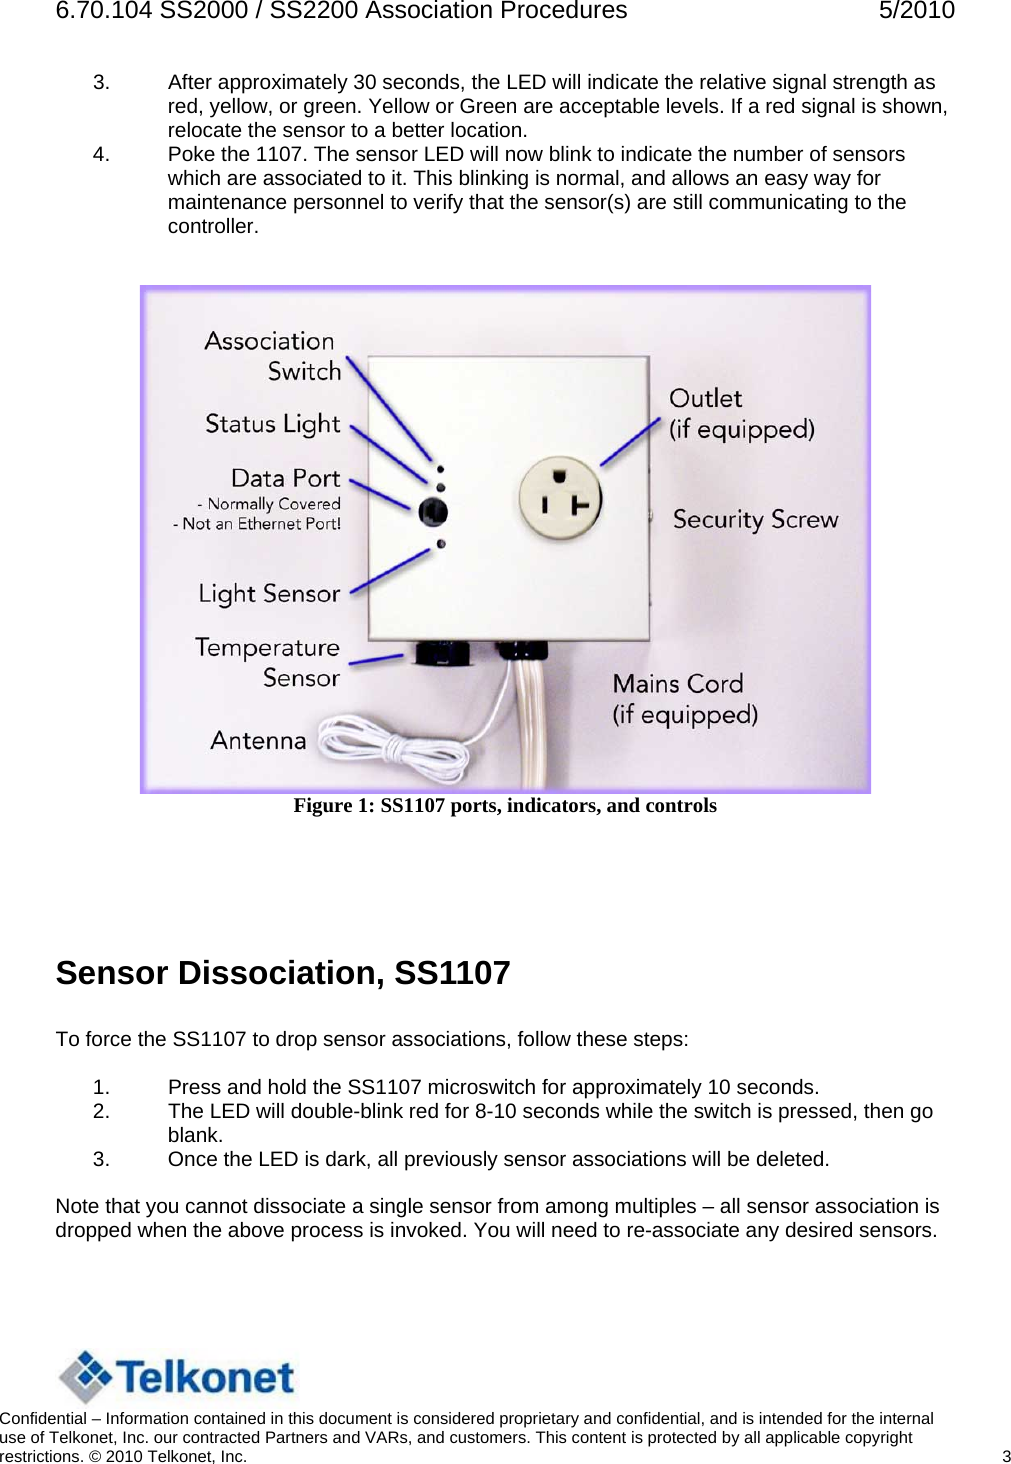 6.70.104 SS2000 / SS2200 Association Procedures  5/2010 3.  After approximately 30 seconds, the LED will indicate the relative signal strength as red, yellow, or green. Yellow or Green are acceptable levels. If a red signal is shown, relocate the sensor to a better location. 4.  Poke the 1107. The sensor LED will now blink to indicate the number of sensors which are associated to it. This blinking is normal, and allows an easy way for maintenance personnel to verify that the sensor(s) are still communicating to the controller.    Figure 1: SS1107 ports, indicators, and controls    Sensor Dissociation, SS1107   To force the SS1107 to drop sensor associations, follow these steps:  1.  Press and hold the SS1107 microswitch for approximately 10 seconds. 2.  The LED will double-blink red for 8-10 seconds while the switch is pressed, then go blank. 3.  Once the LED is dark, all previously sensor associations will be deleted.  Note that you cannot dissociate a single sensor from among multiples – all sensor association is dropped when the above process is invoked. You will need to re-associate any desired sensors.    Confidential – Information contained in this document is considered proprietary and confidential, and is intended for the internal use of Telkonet, Inc. our contracted Partners and VARs, and customers. This content is protected by all applicable copyright restrictions. © 2010 Telkonet, Inc.    3  